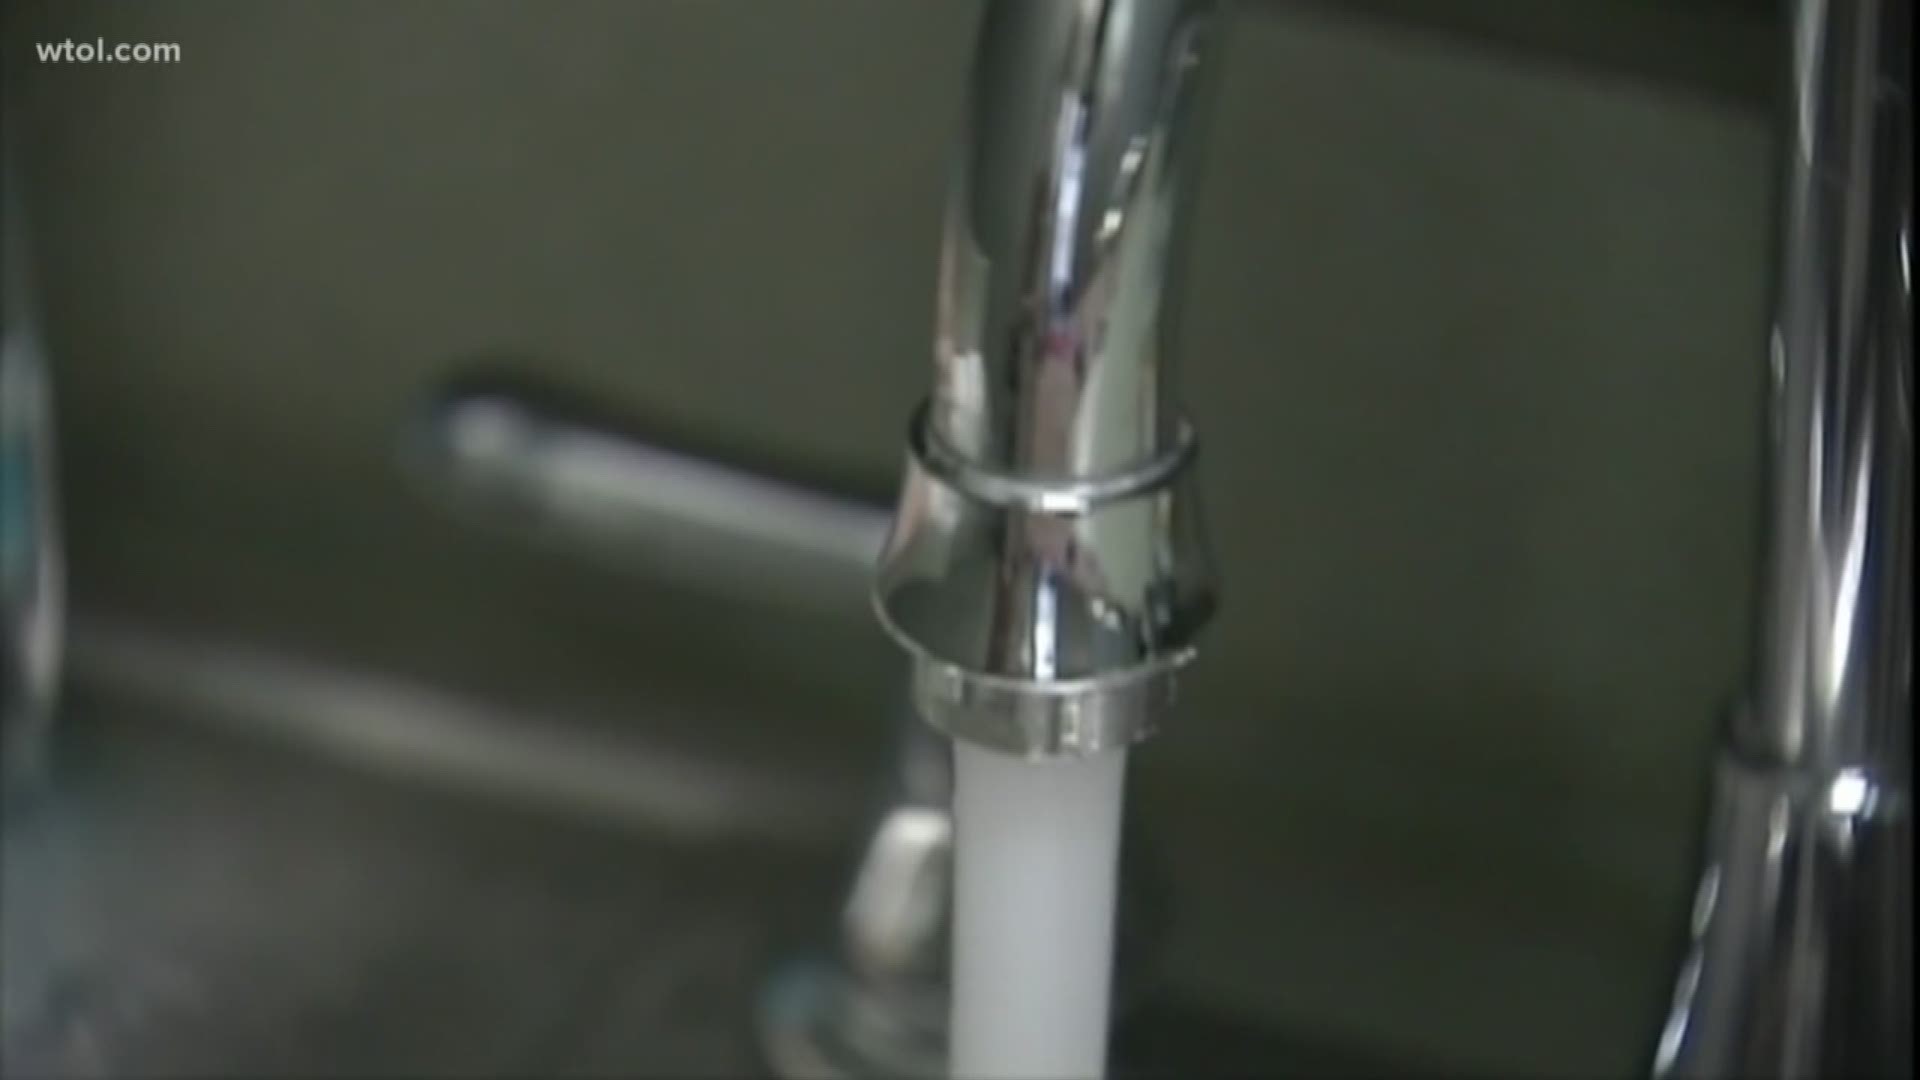 After years of pushing for an equal water agreement, Sylvania officials are ready for change.